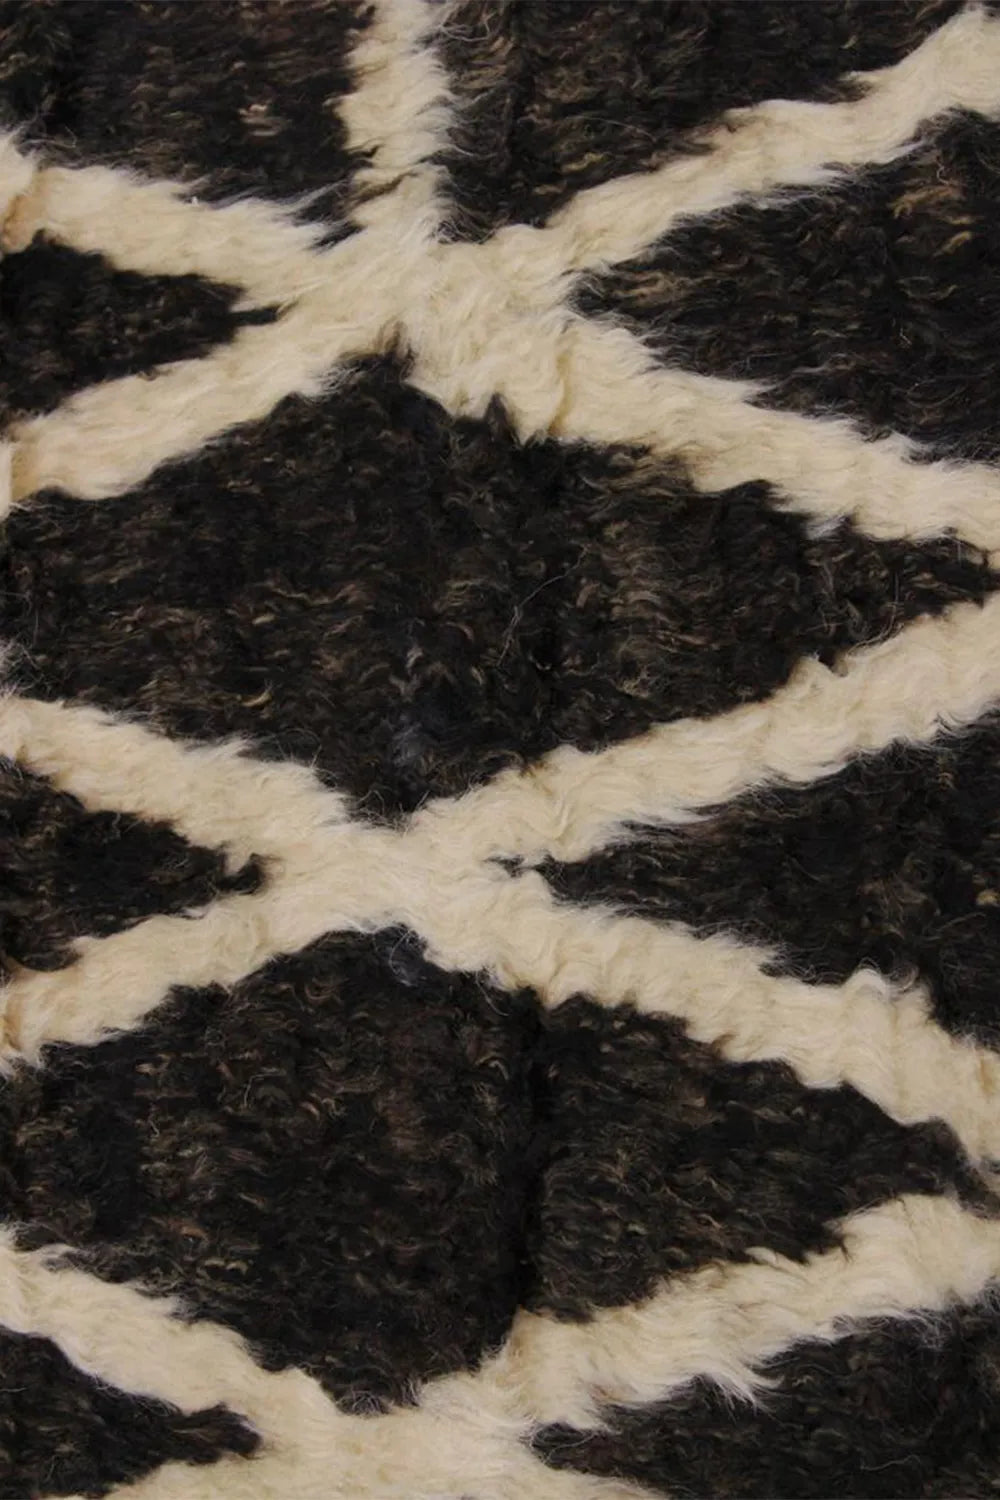 Handmade black and white wool shag rug with high pile for luxurious comfort.